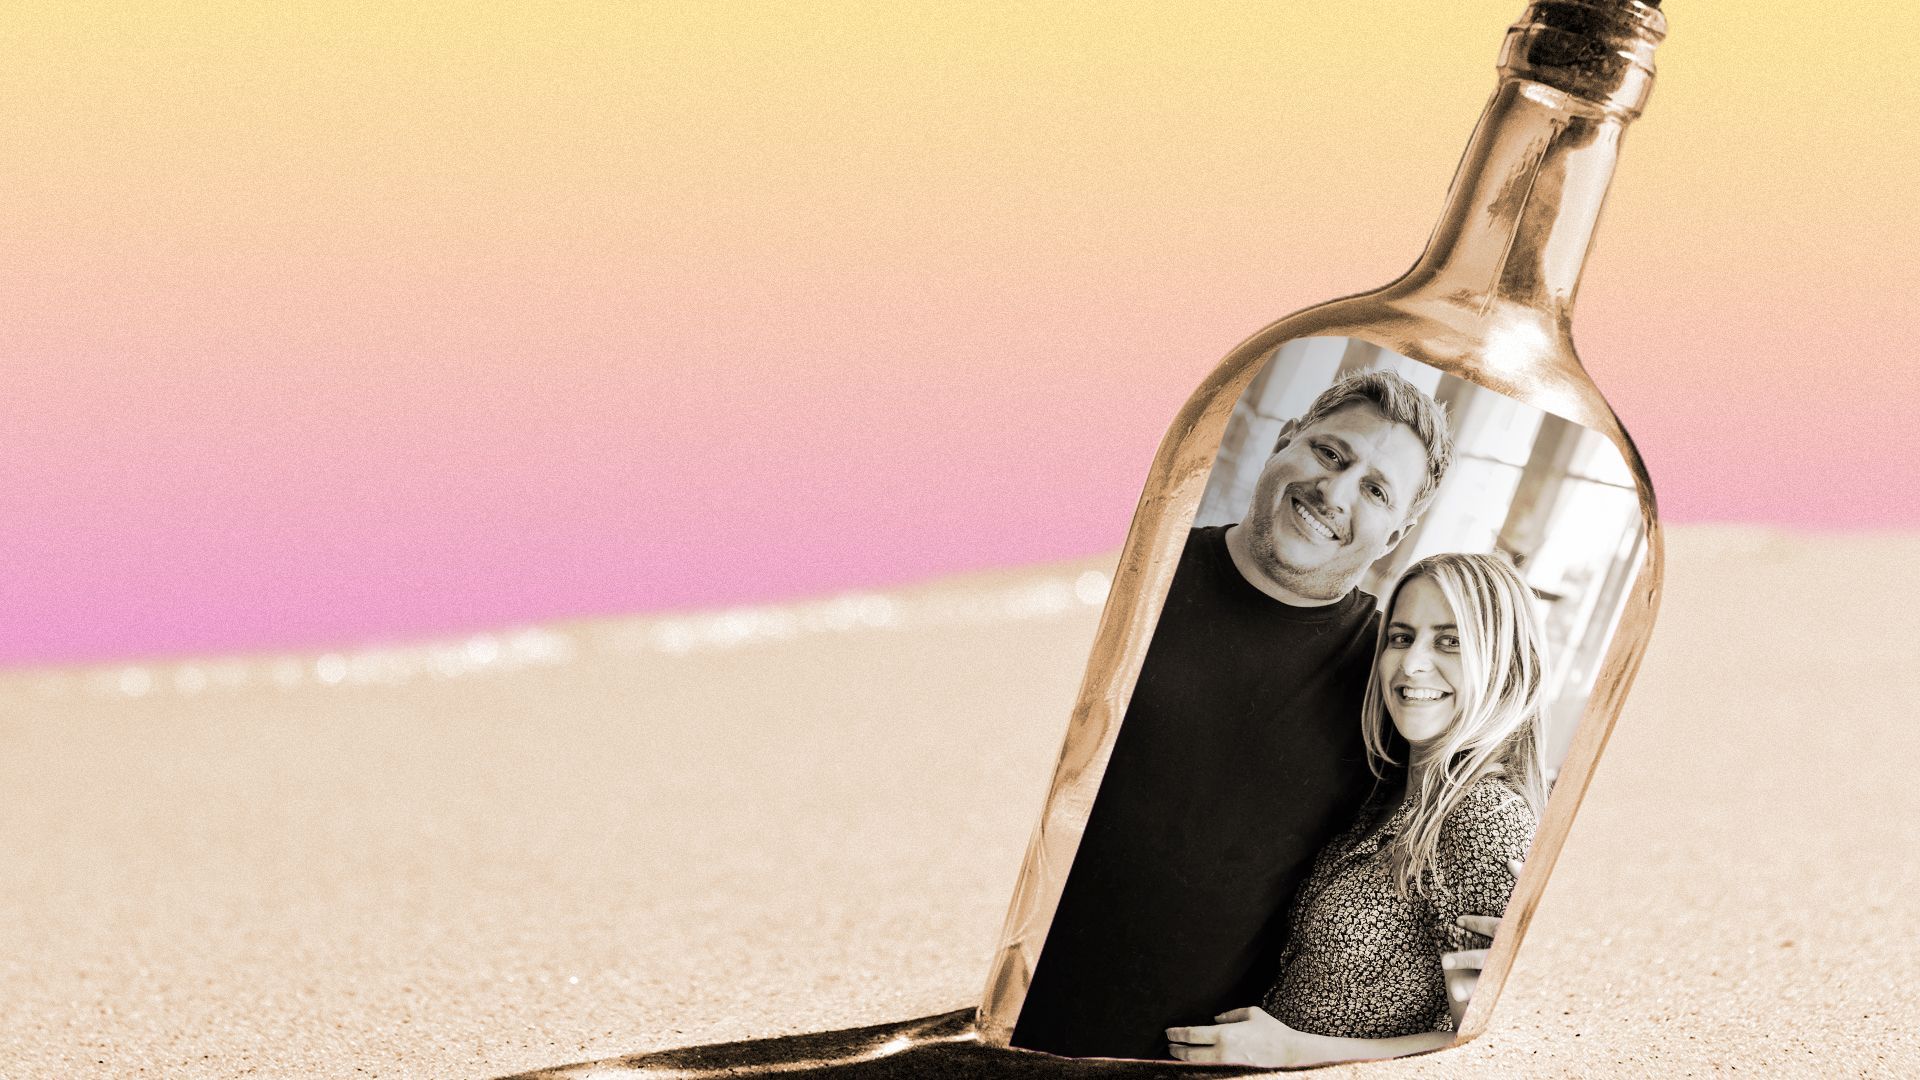 Photo illustration of Eric and Sophie Nathal inside a bottle on a beach.